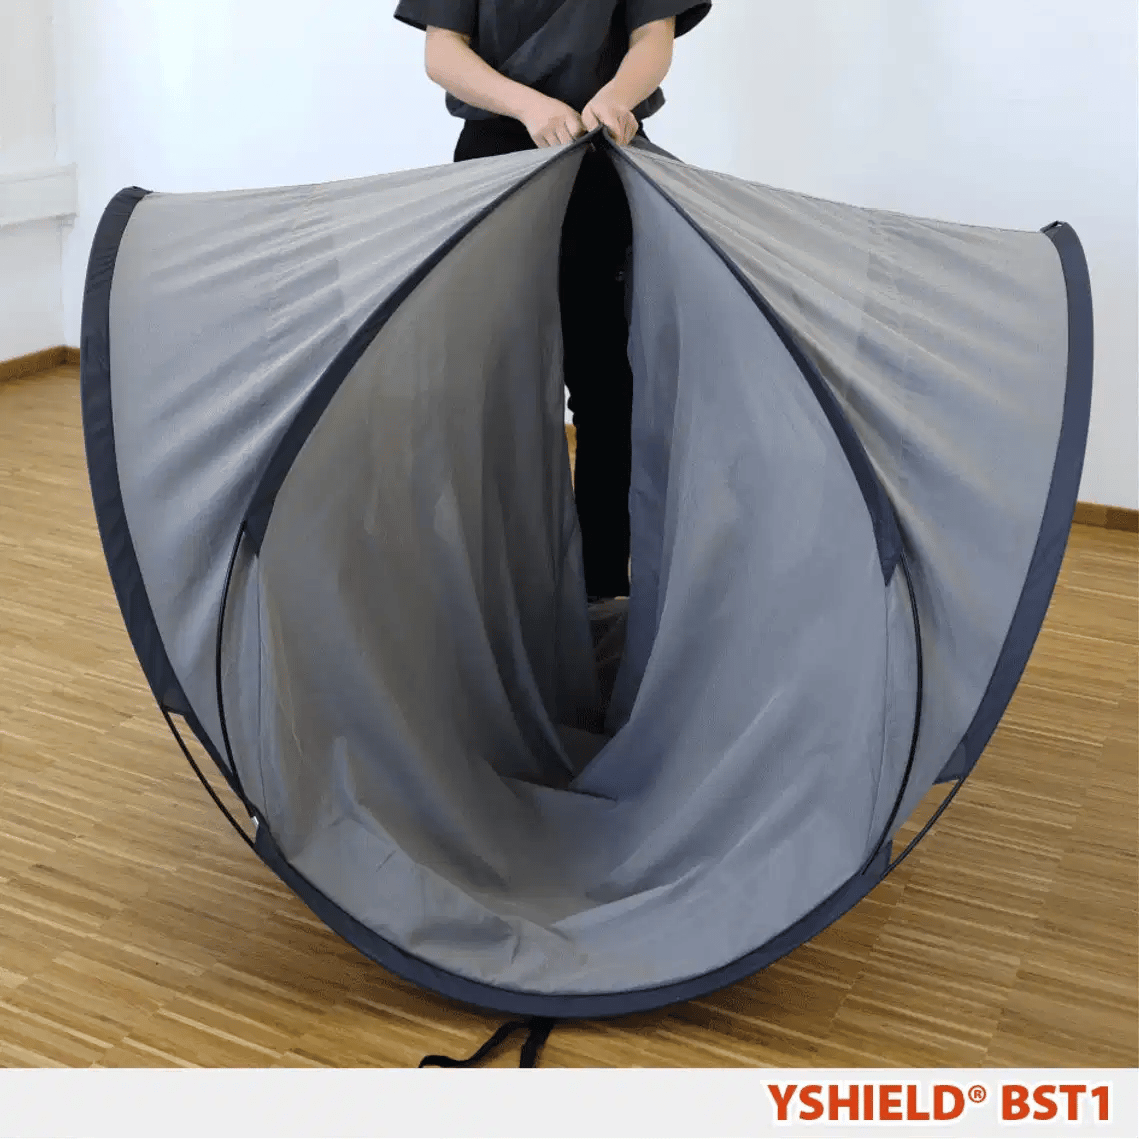 YSHIELD® BST1 | SAFECAVE Shielding tent popup | Single bed